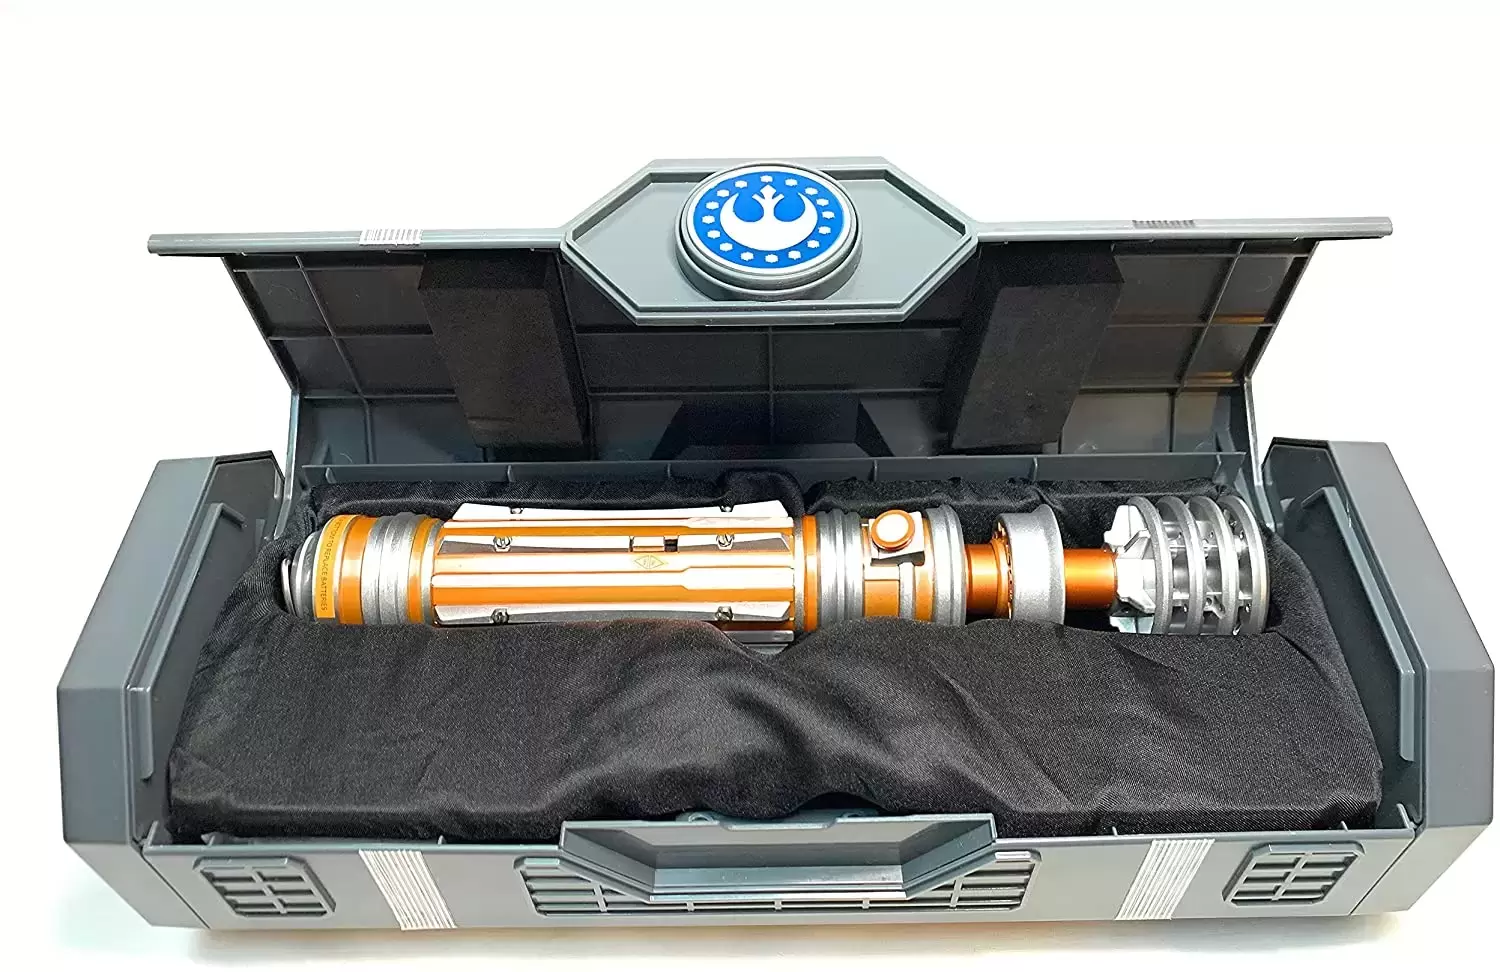 Lightsabers And Roleplay Items - Legacy Lightsaber - Leia Organa Lightsaber